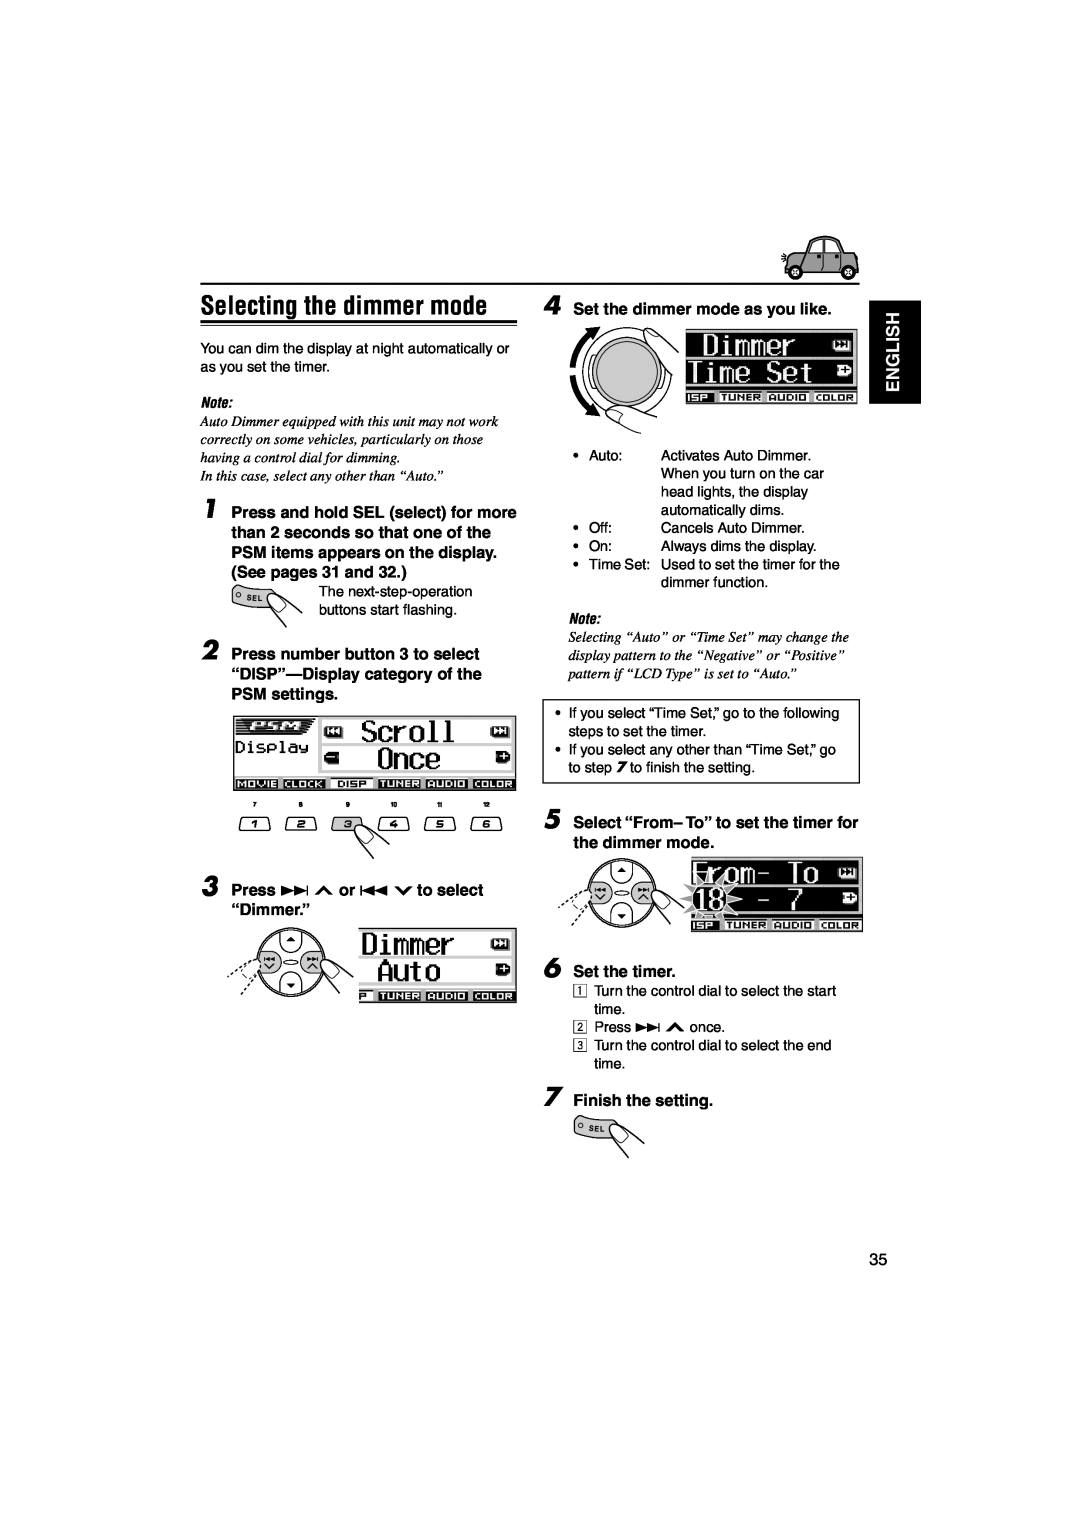 JVC KD-LH1101 manual Selecting the dimmer mode, English, Set the dimmer mode as you like, Press ¢ or 4 to select “Dimmer.” 